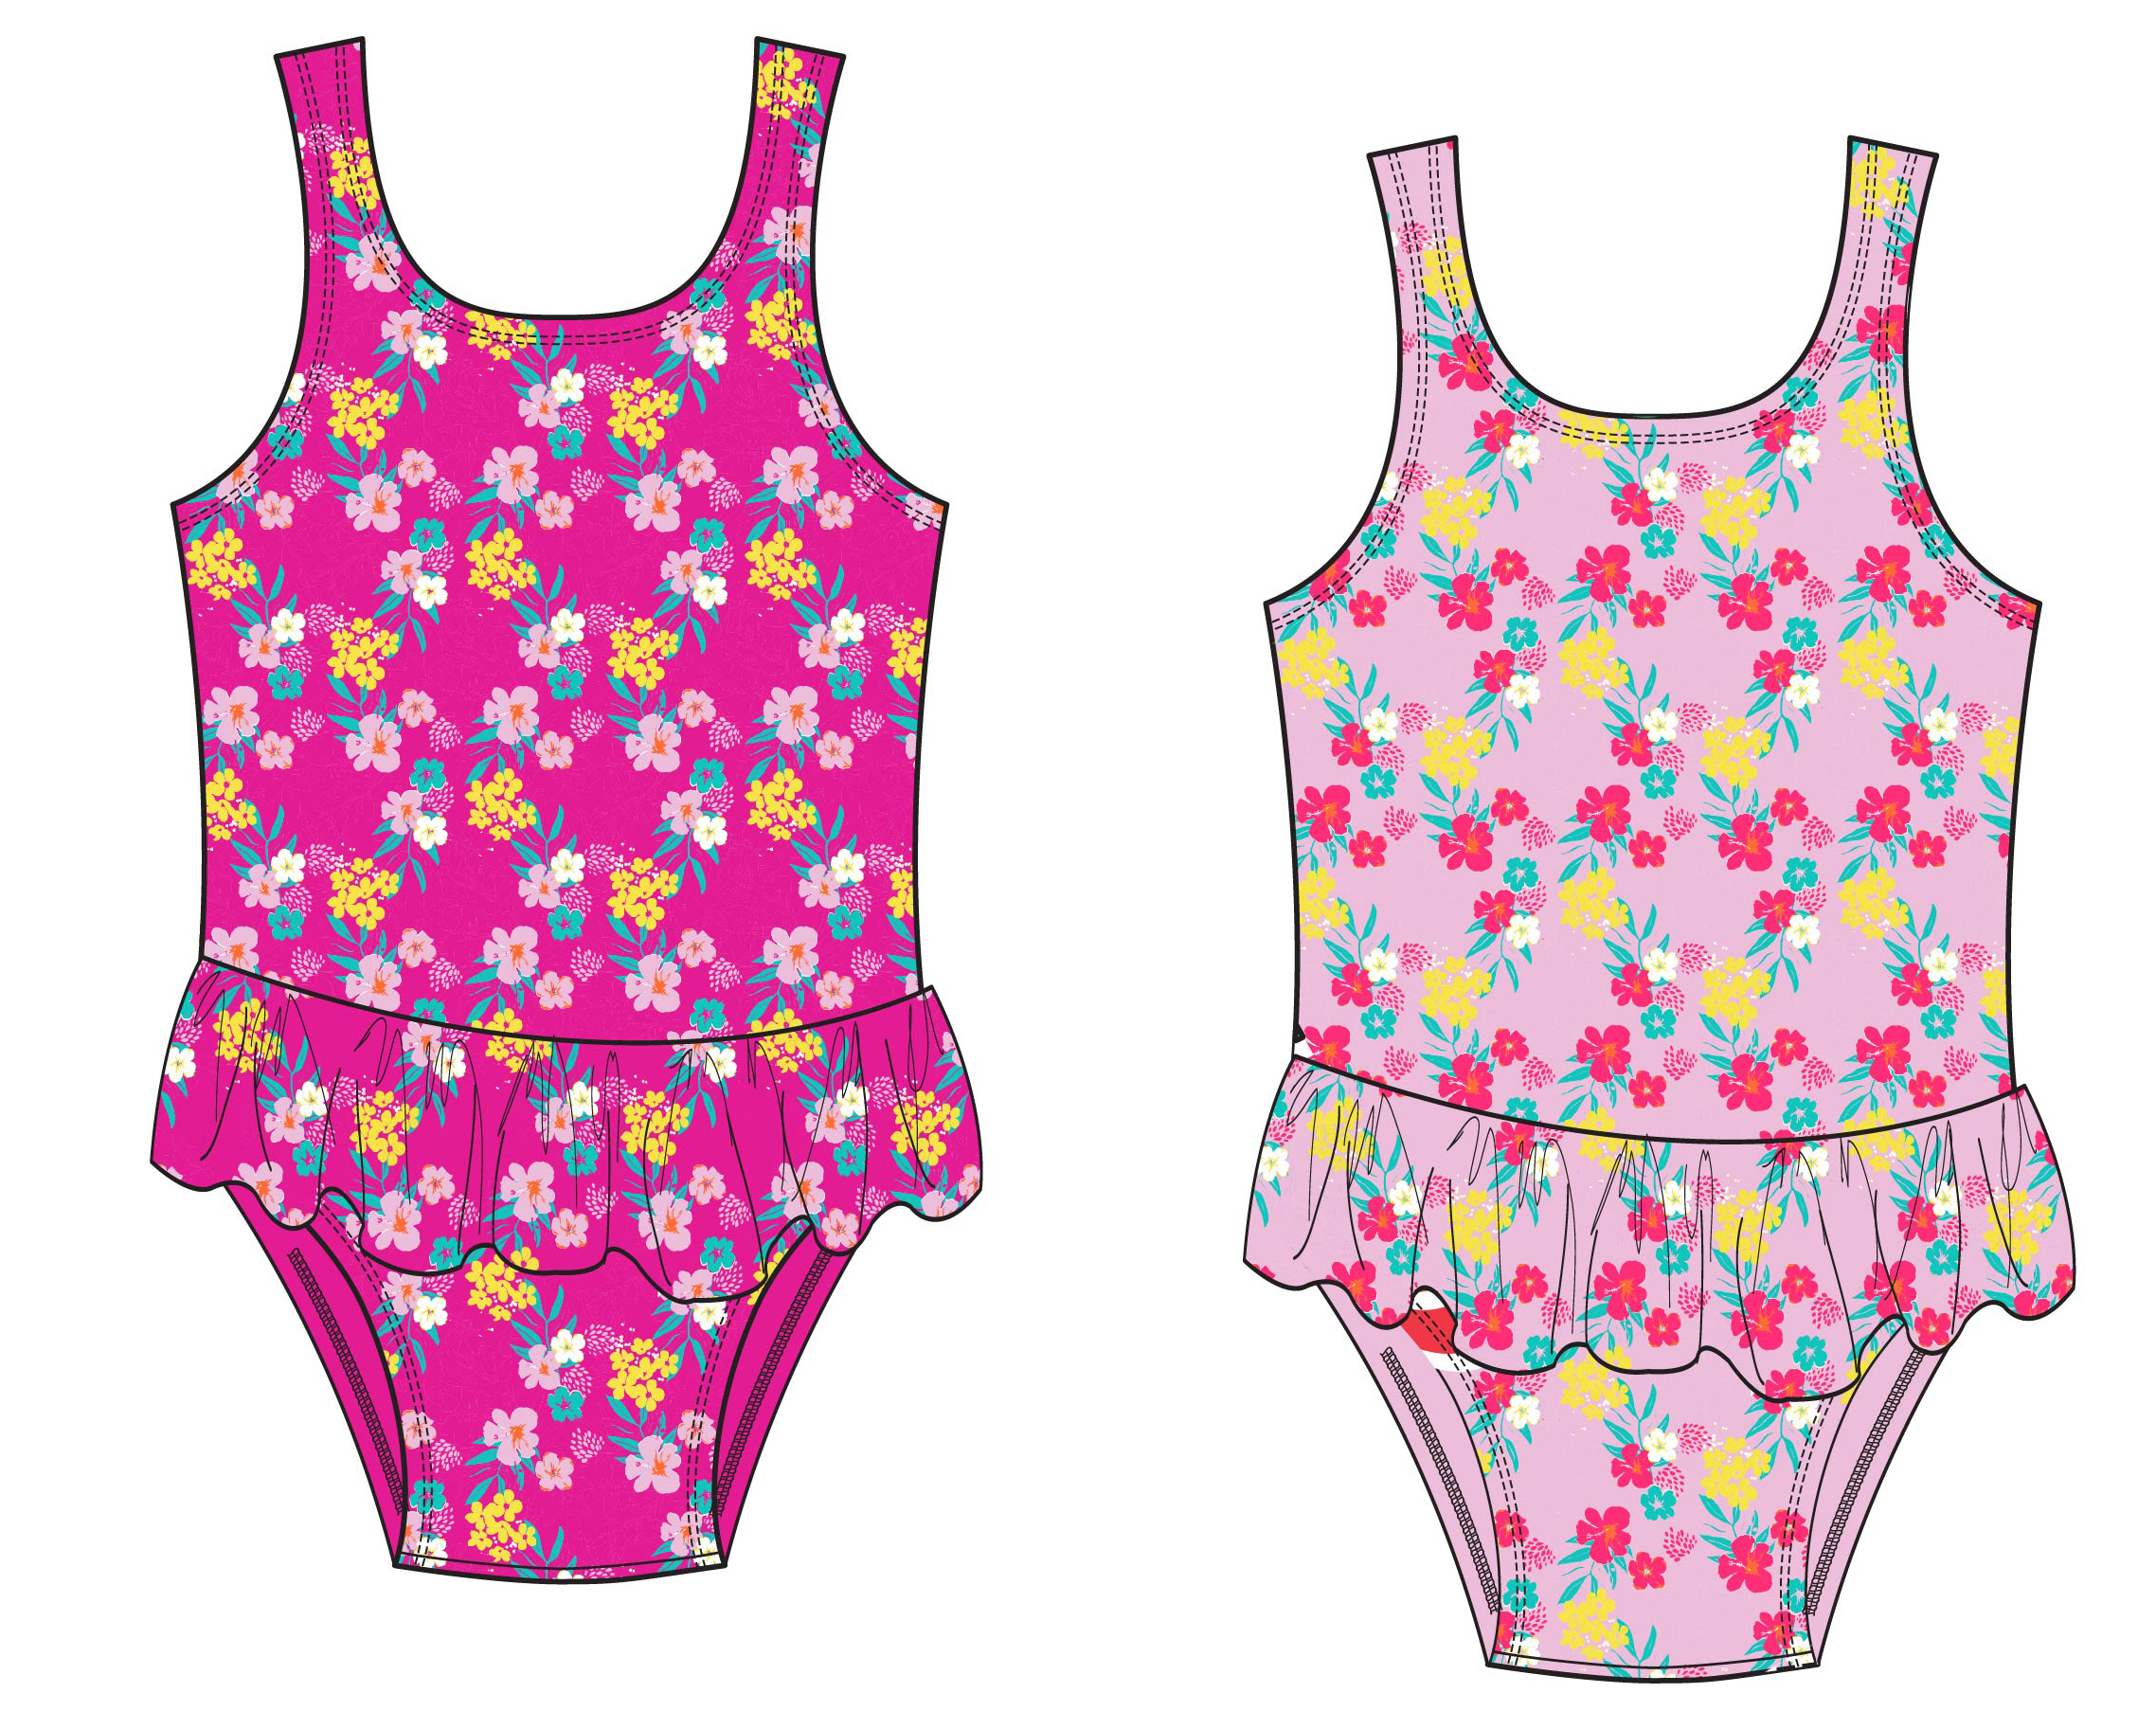 Baby Girl's One-Piece Printed Swimsuits w/ Ruffle SKIRT - Hibiscus Floral Print - Sizes 12M-24M